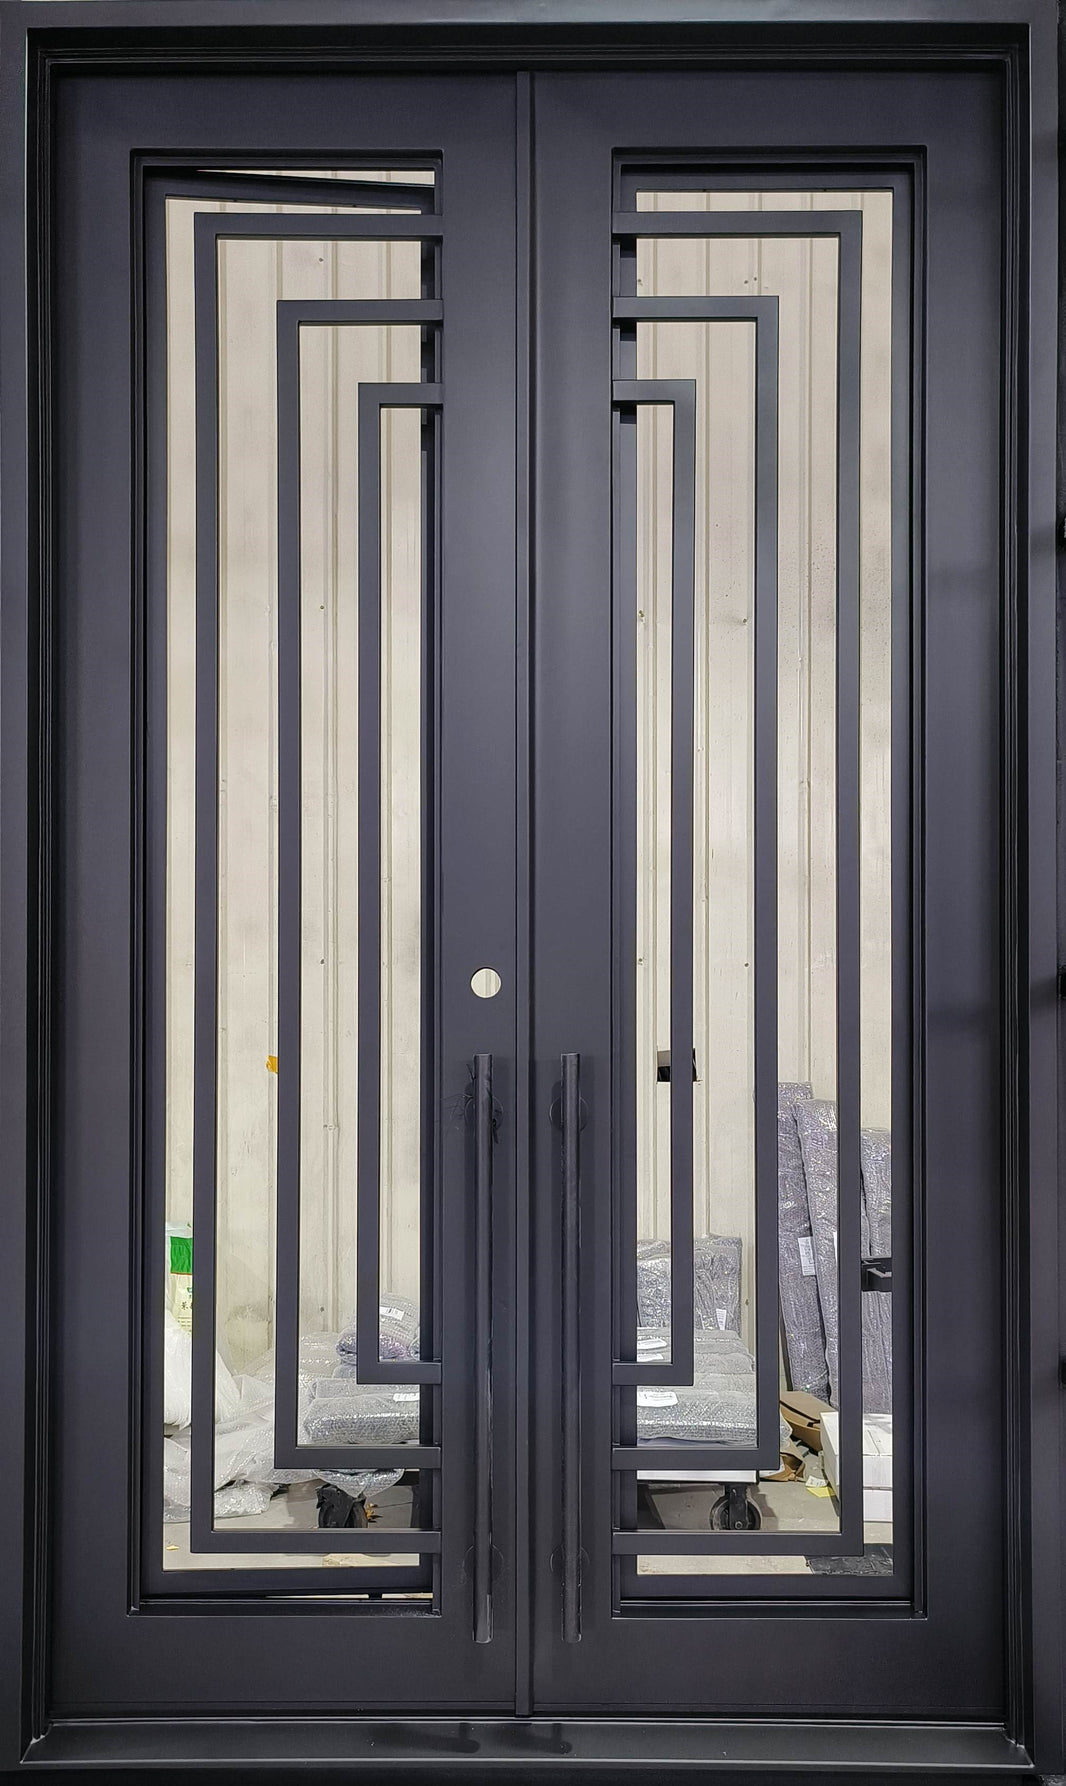 New Modern Iron Door Style | Square Top With kickplate | Model # IWD 924